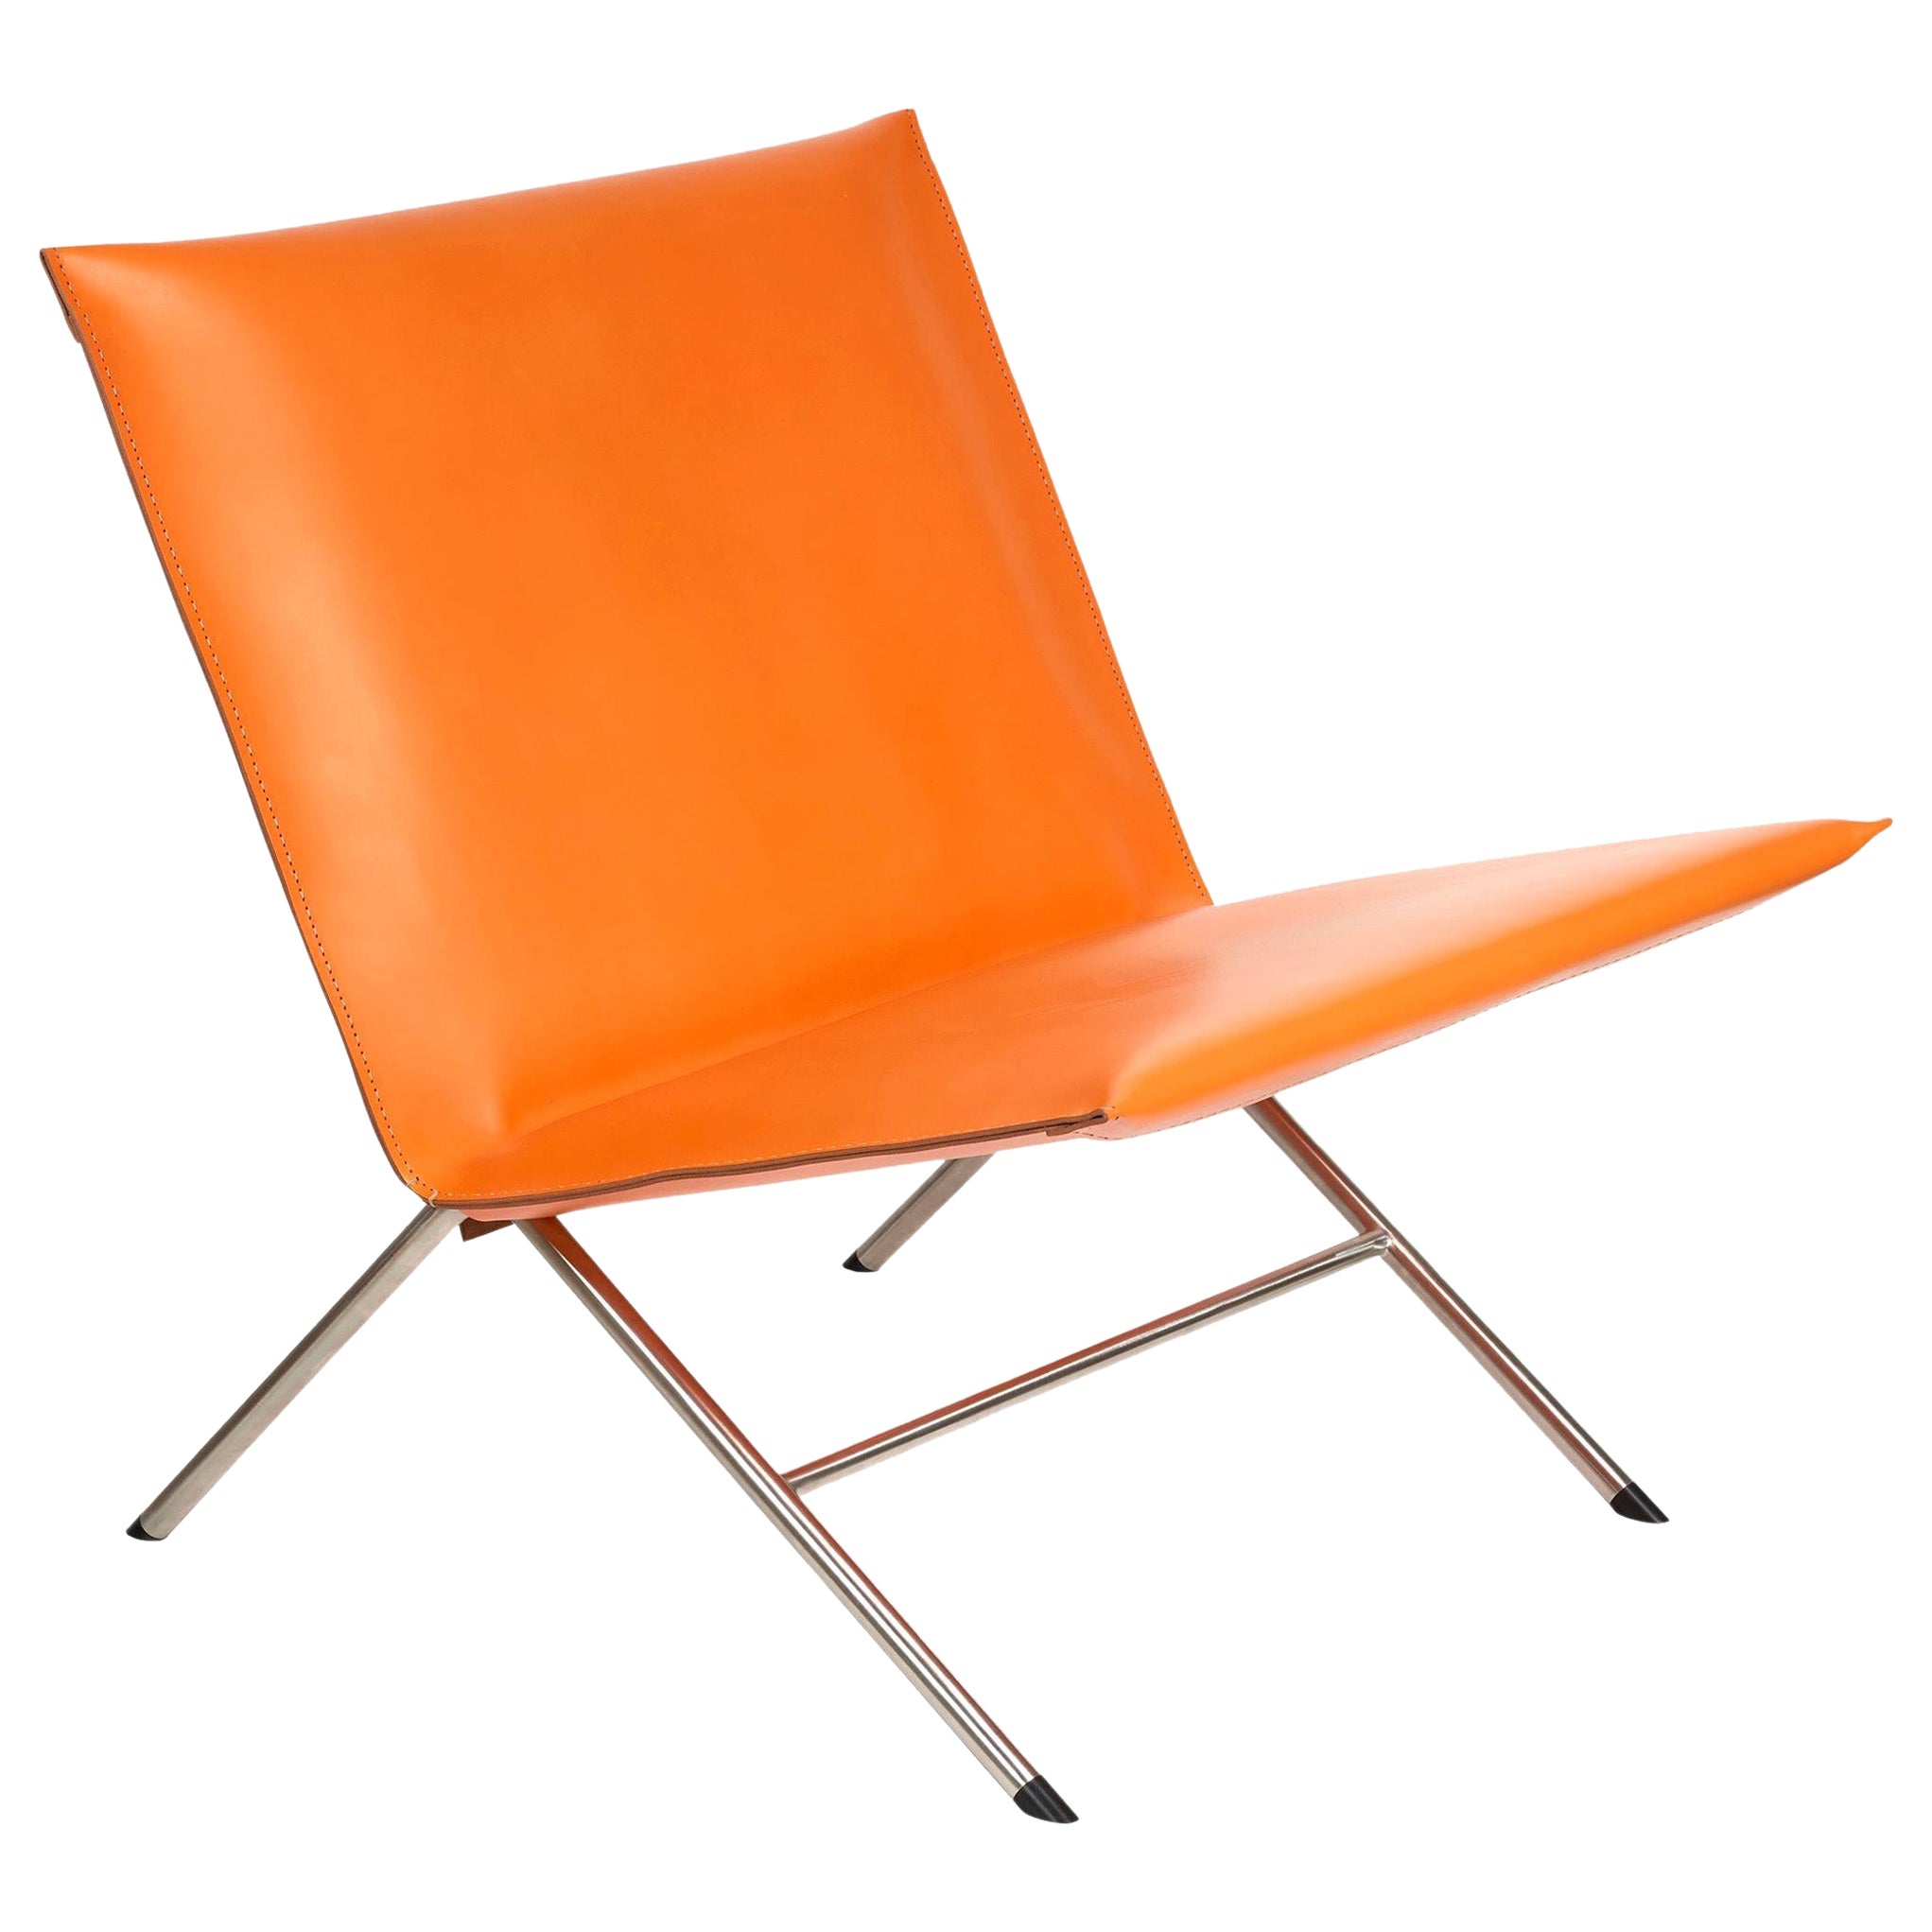 Gioia Meller-Marcovicz, Recline, Lounge Chair For Sale